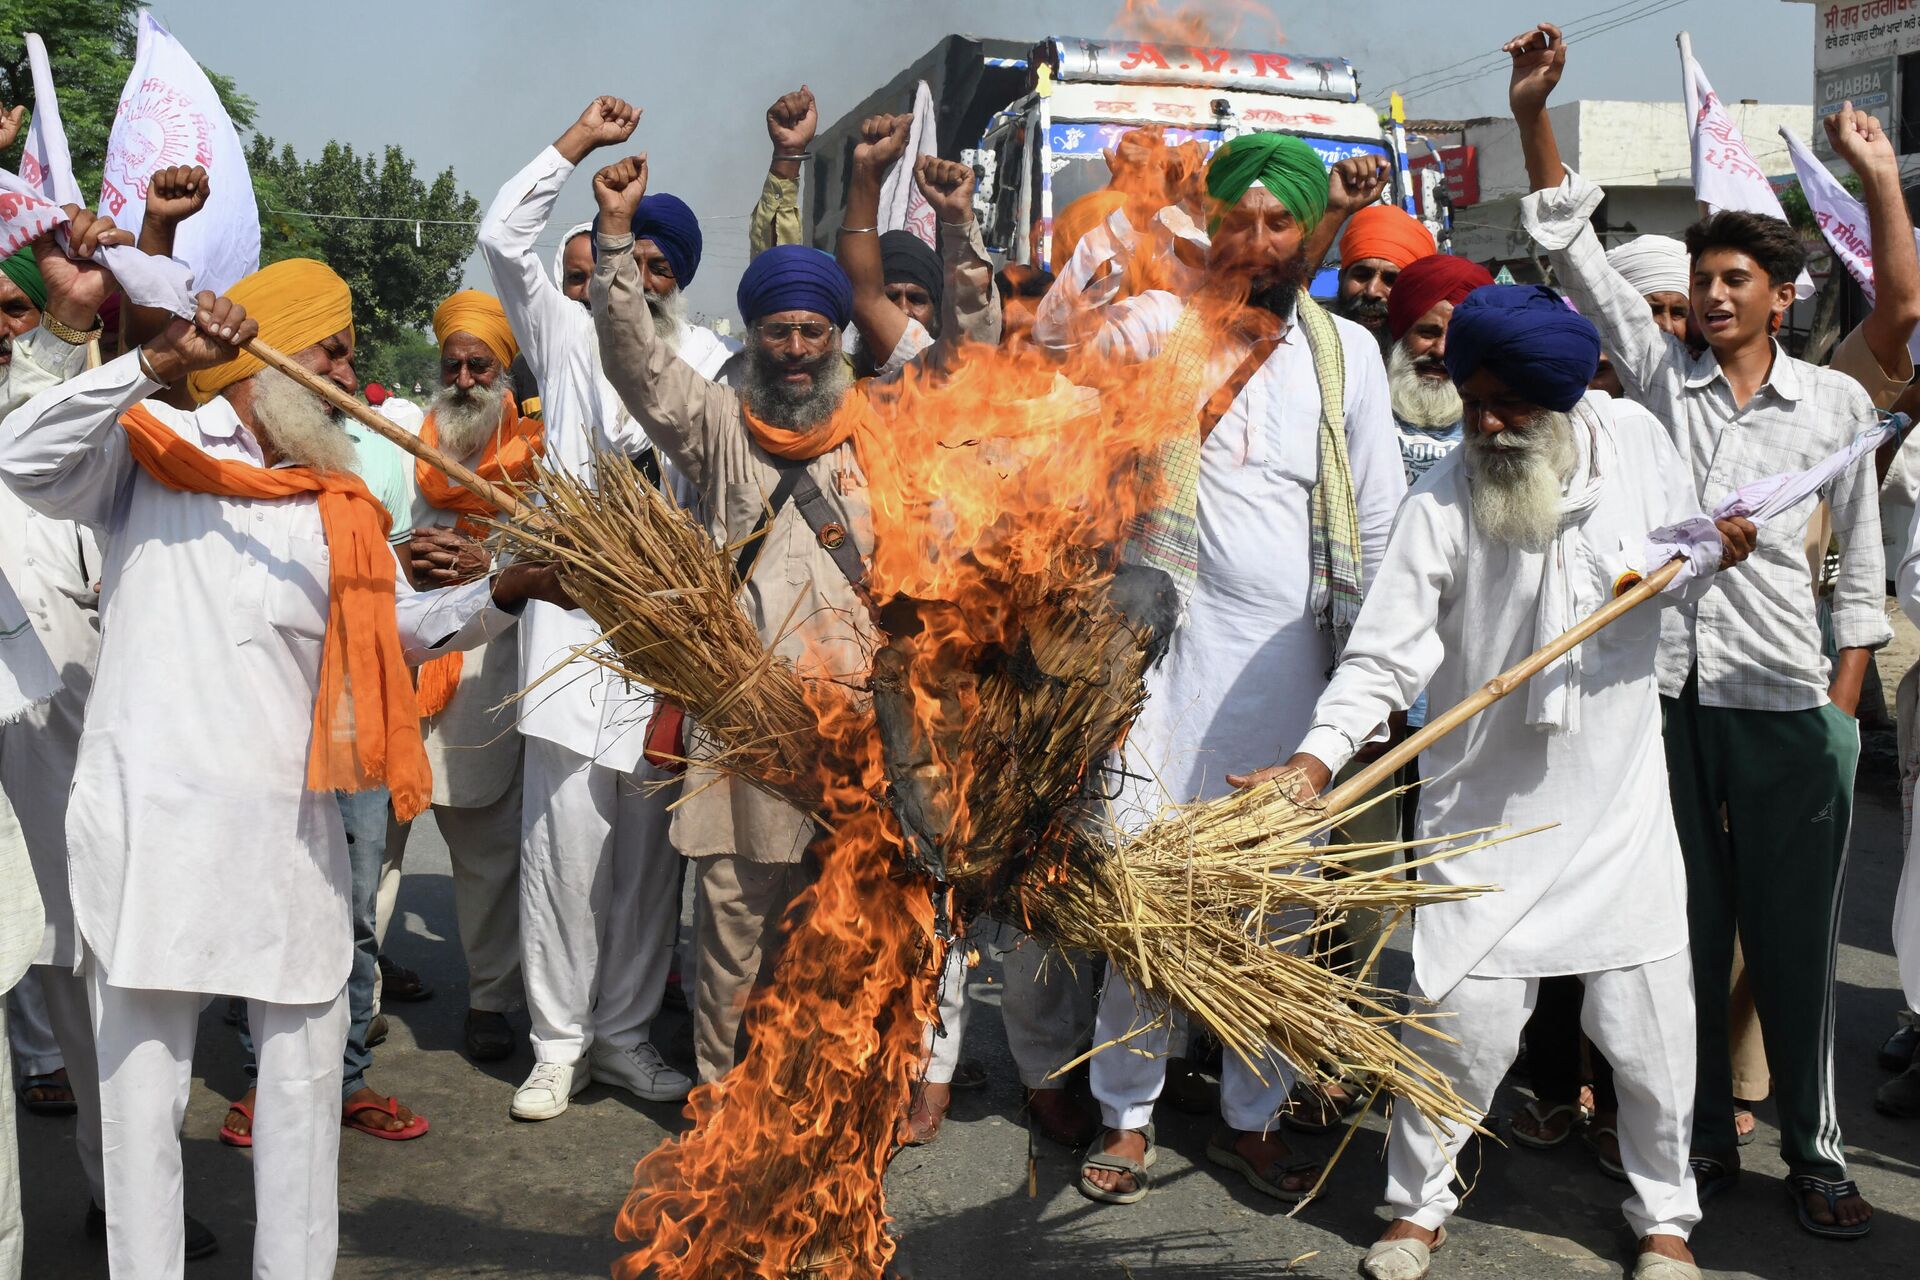 Farmers shout slogans as they burn an effigy of India's Prime Minister Narendra Modi and Uttar Pradesh state Chief Minister Yogi Adityanath during a protest on the outskirts of Amritsar on October 6, 2021, days after 9 people died in violent clashes during a farmers protest in Lakhimpur Kheri district in Utta Pradesh - Sputnik International, 1920, 18.10.2021